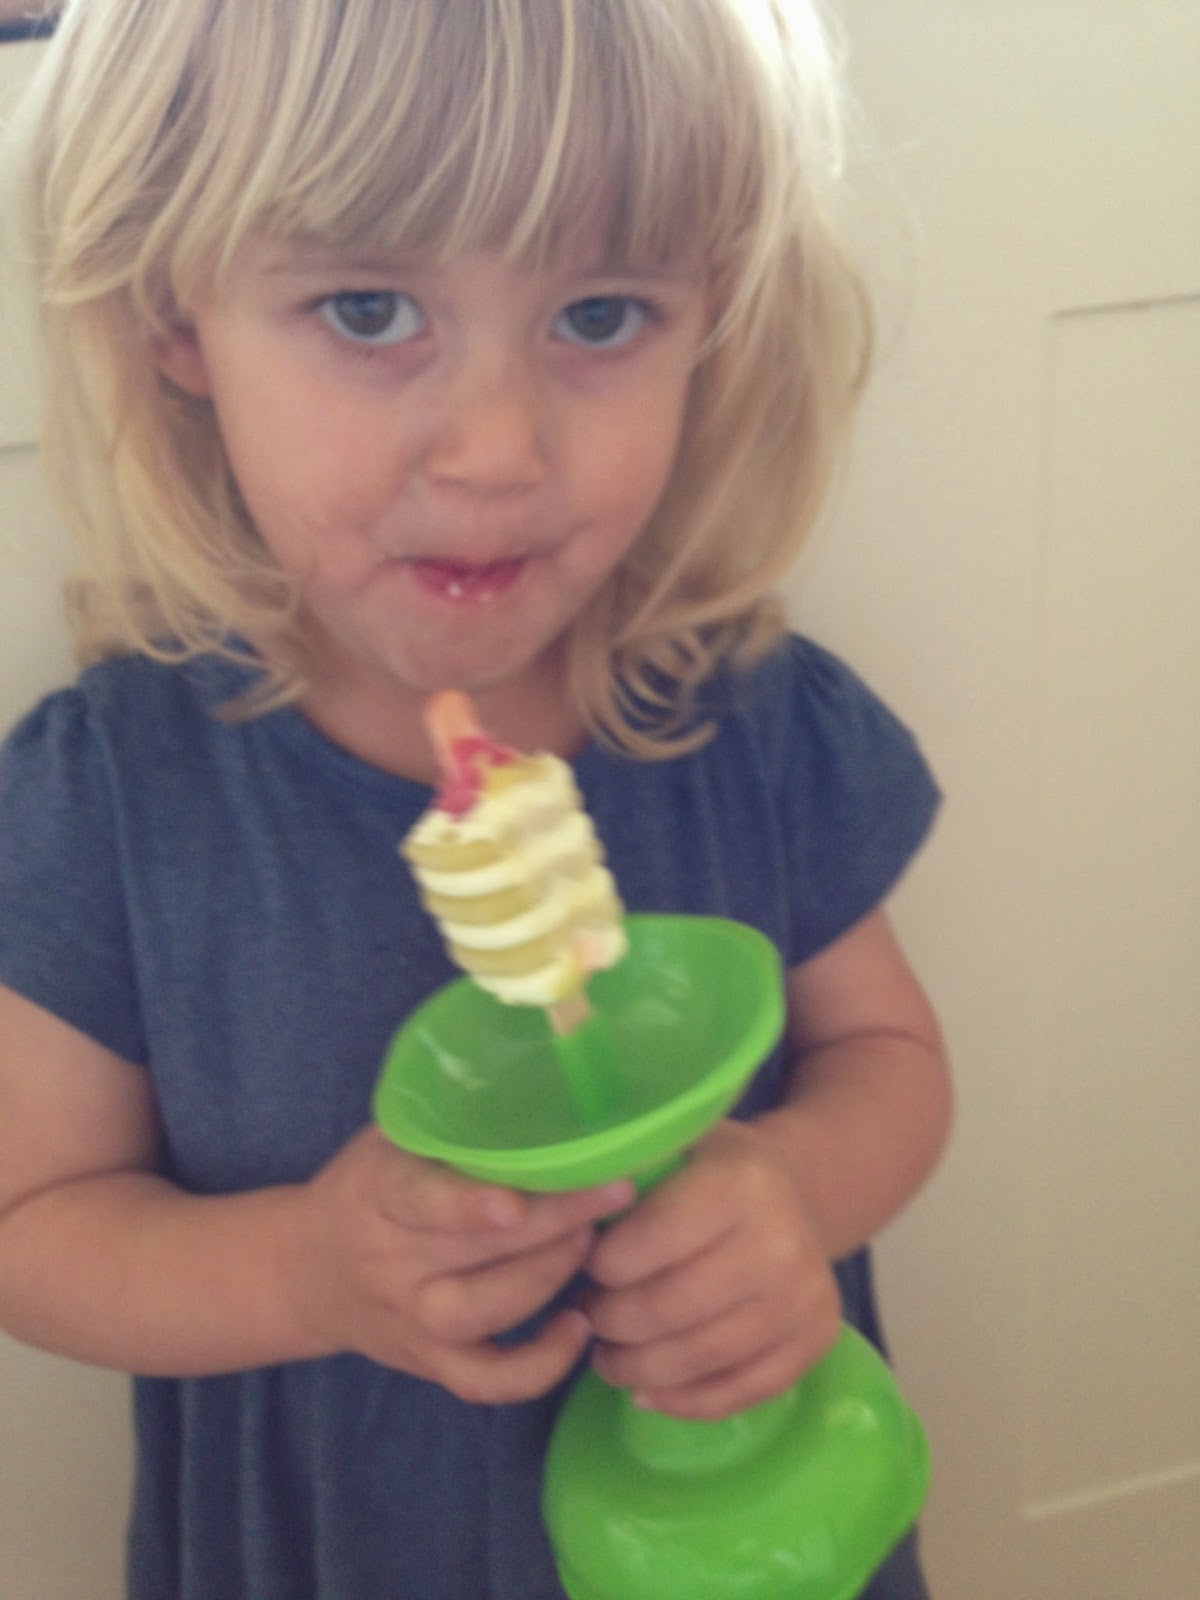 mamasVIb | V. I. BAKE: 5 products that make toddler lunchtimes a little easier - and mess free! | yum box | fun cone | toddler meals | mess free meals | try tidy for kids | ice creme cone holder | little globetrotter bib | kids bib | roll up bib | mamasVIB | sipsnap cup covers | cups for kids | toddler cups | travelling cover for cups | sip snap | yum  box | bento lunch boxes | lunch box for kids | healthy eating | mamasvib 